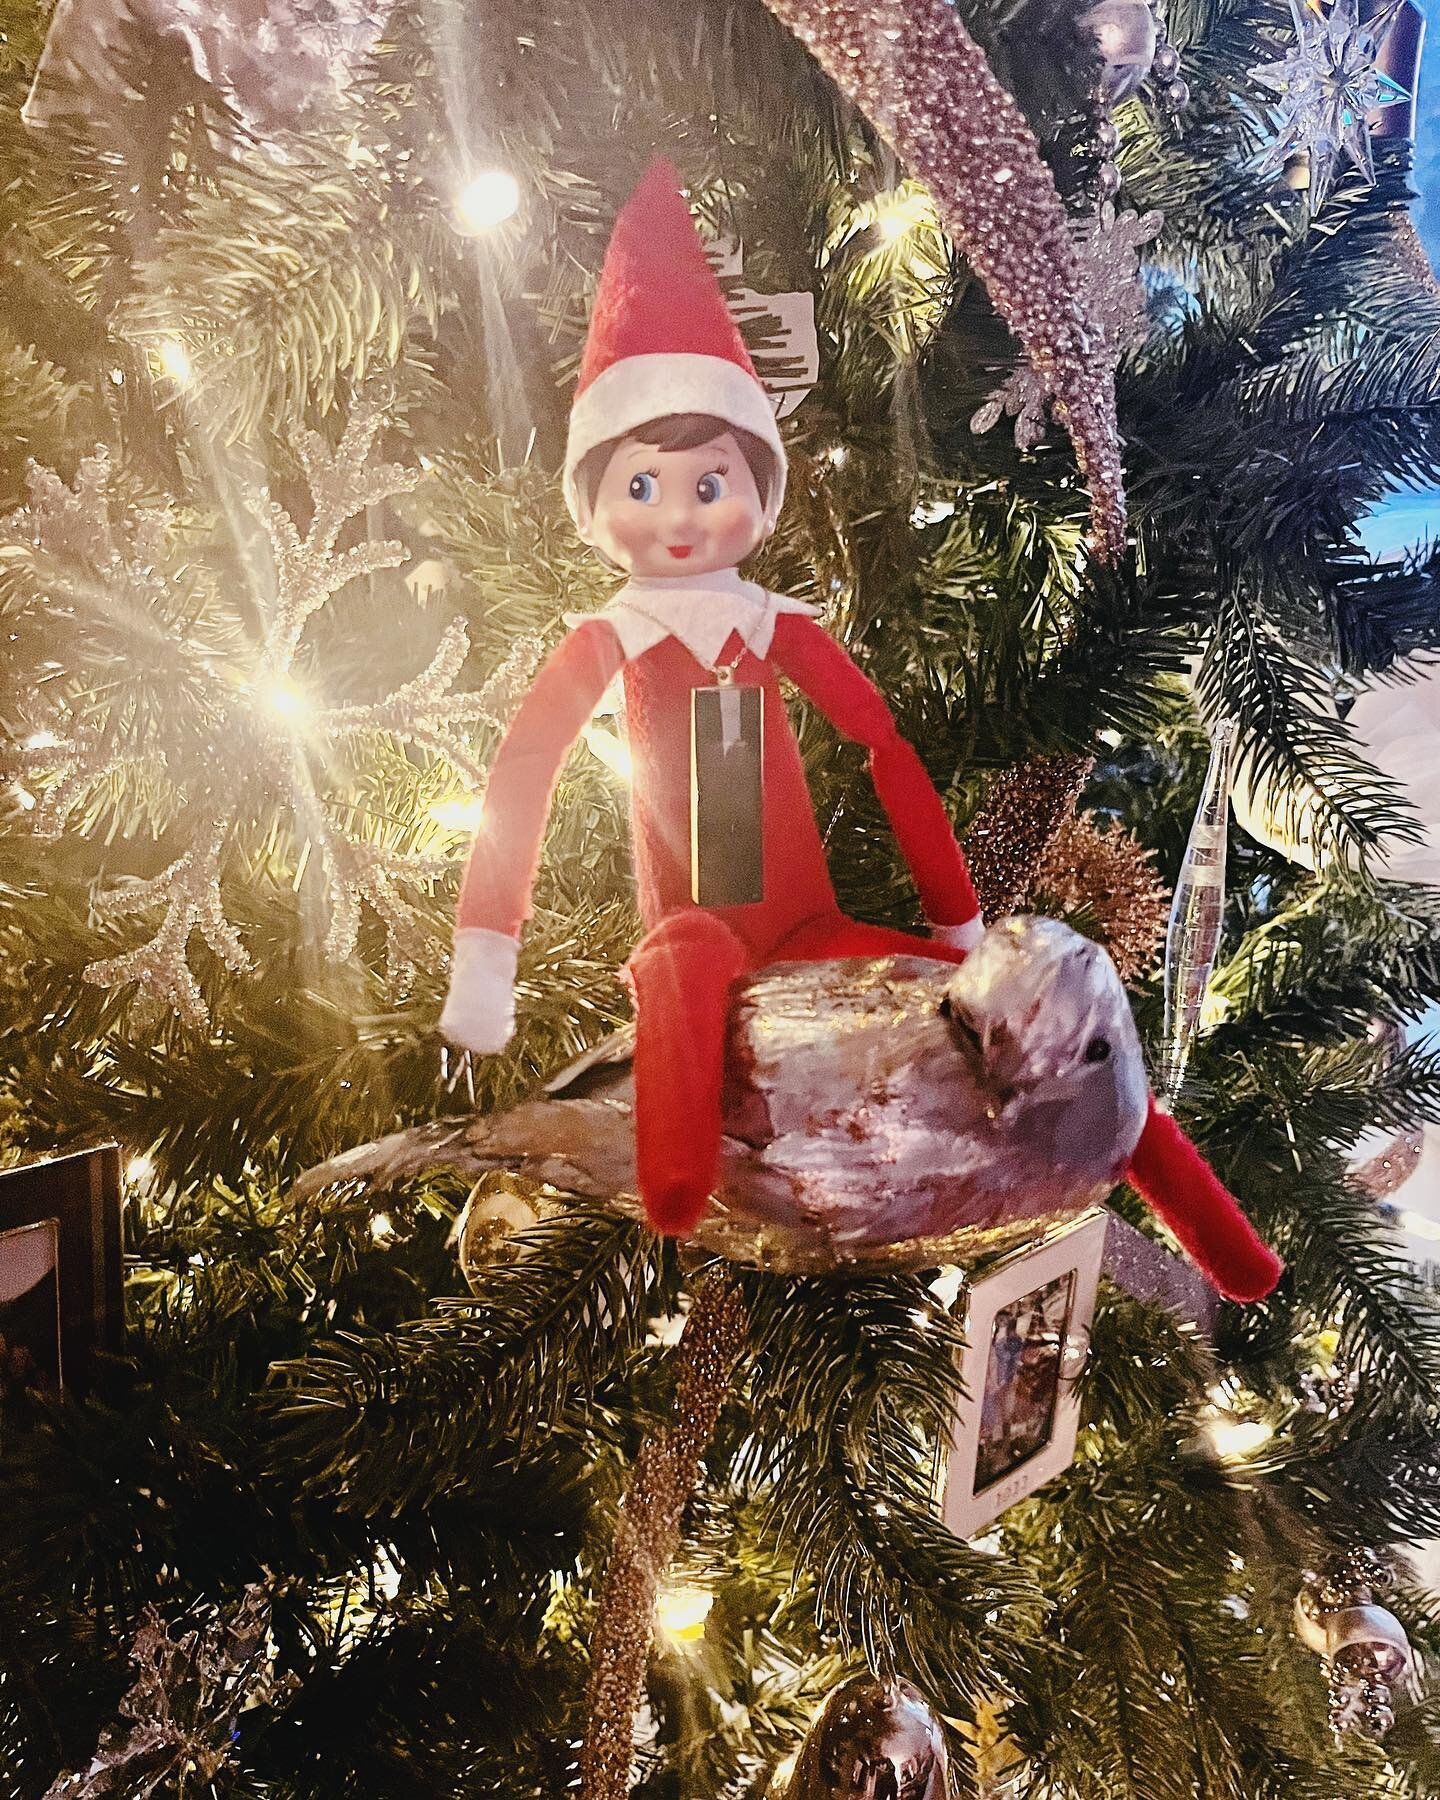 Have your elf a merry little Christmas! 🎄😉